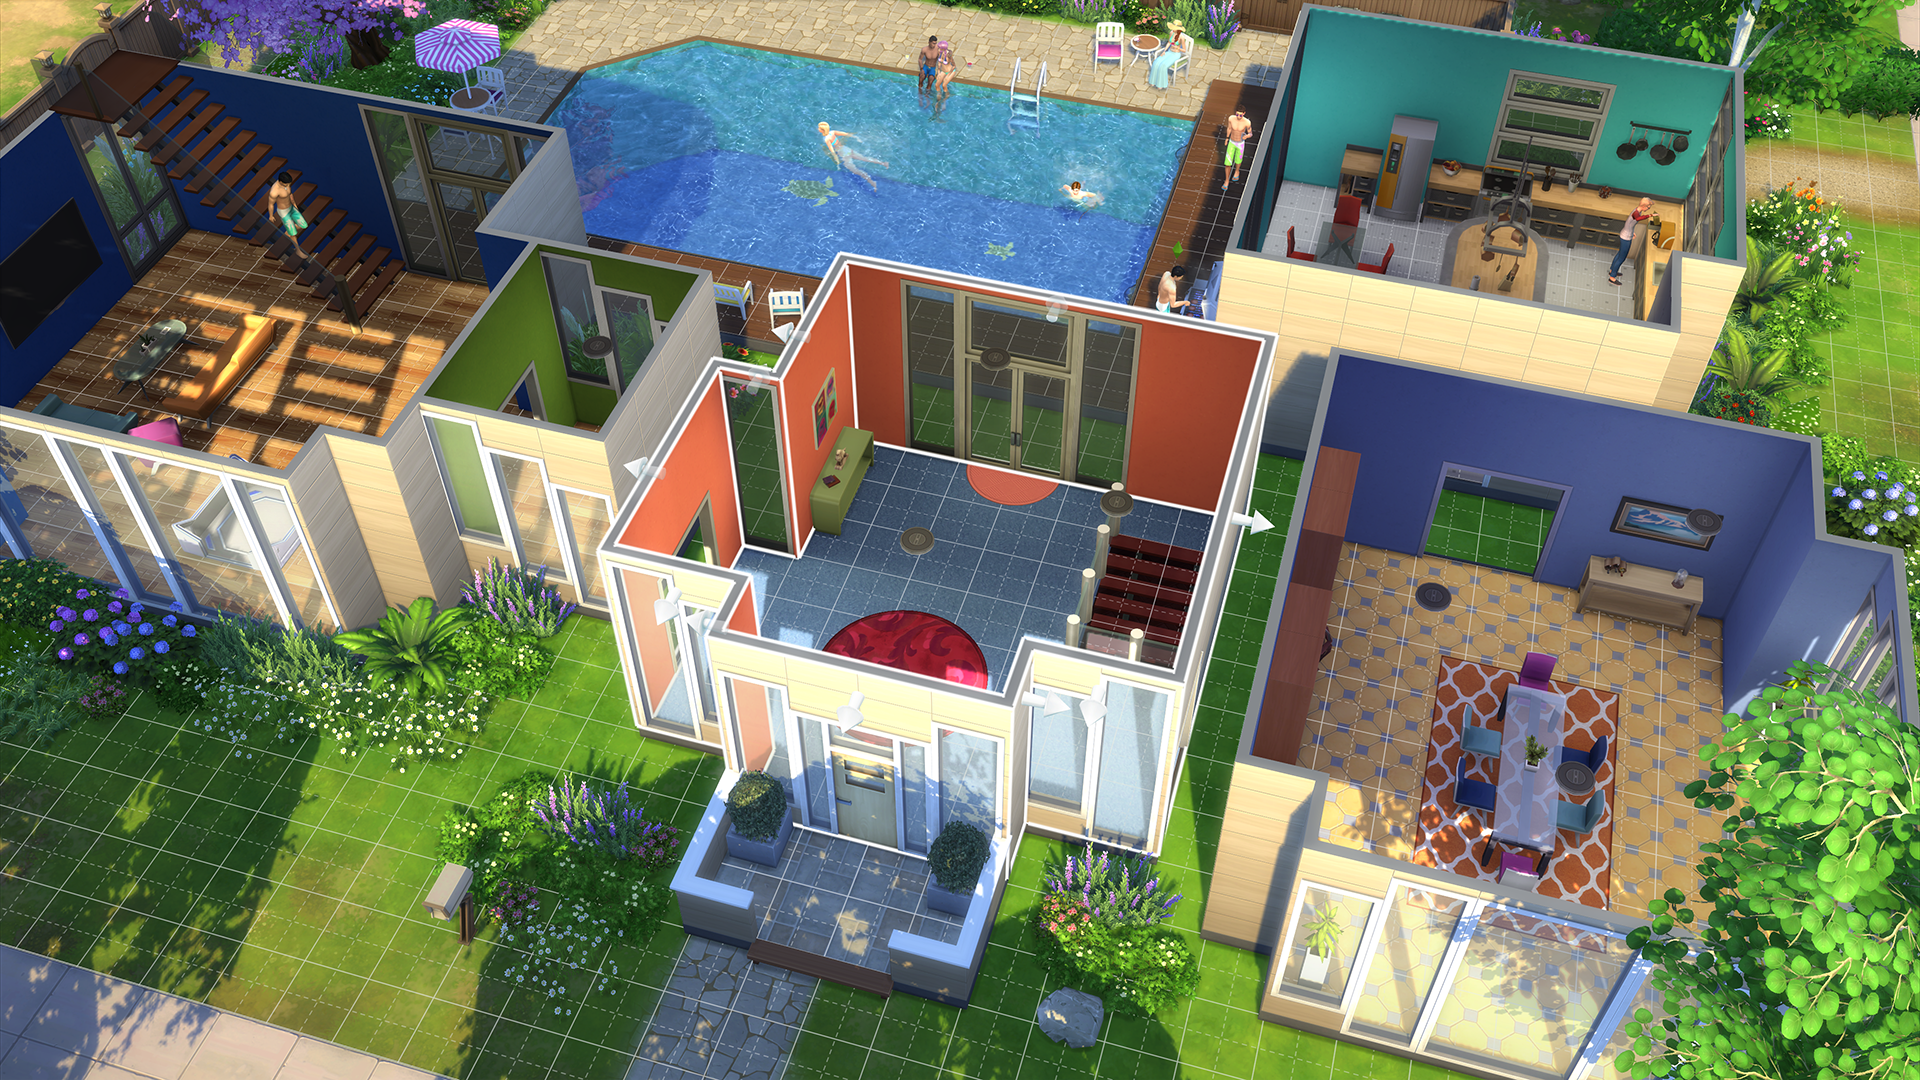 The Sims 4 is free on PC right now - Polygon